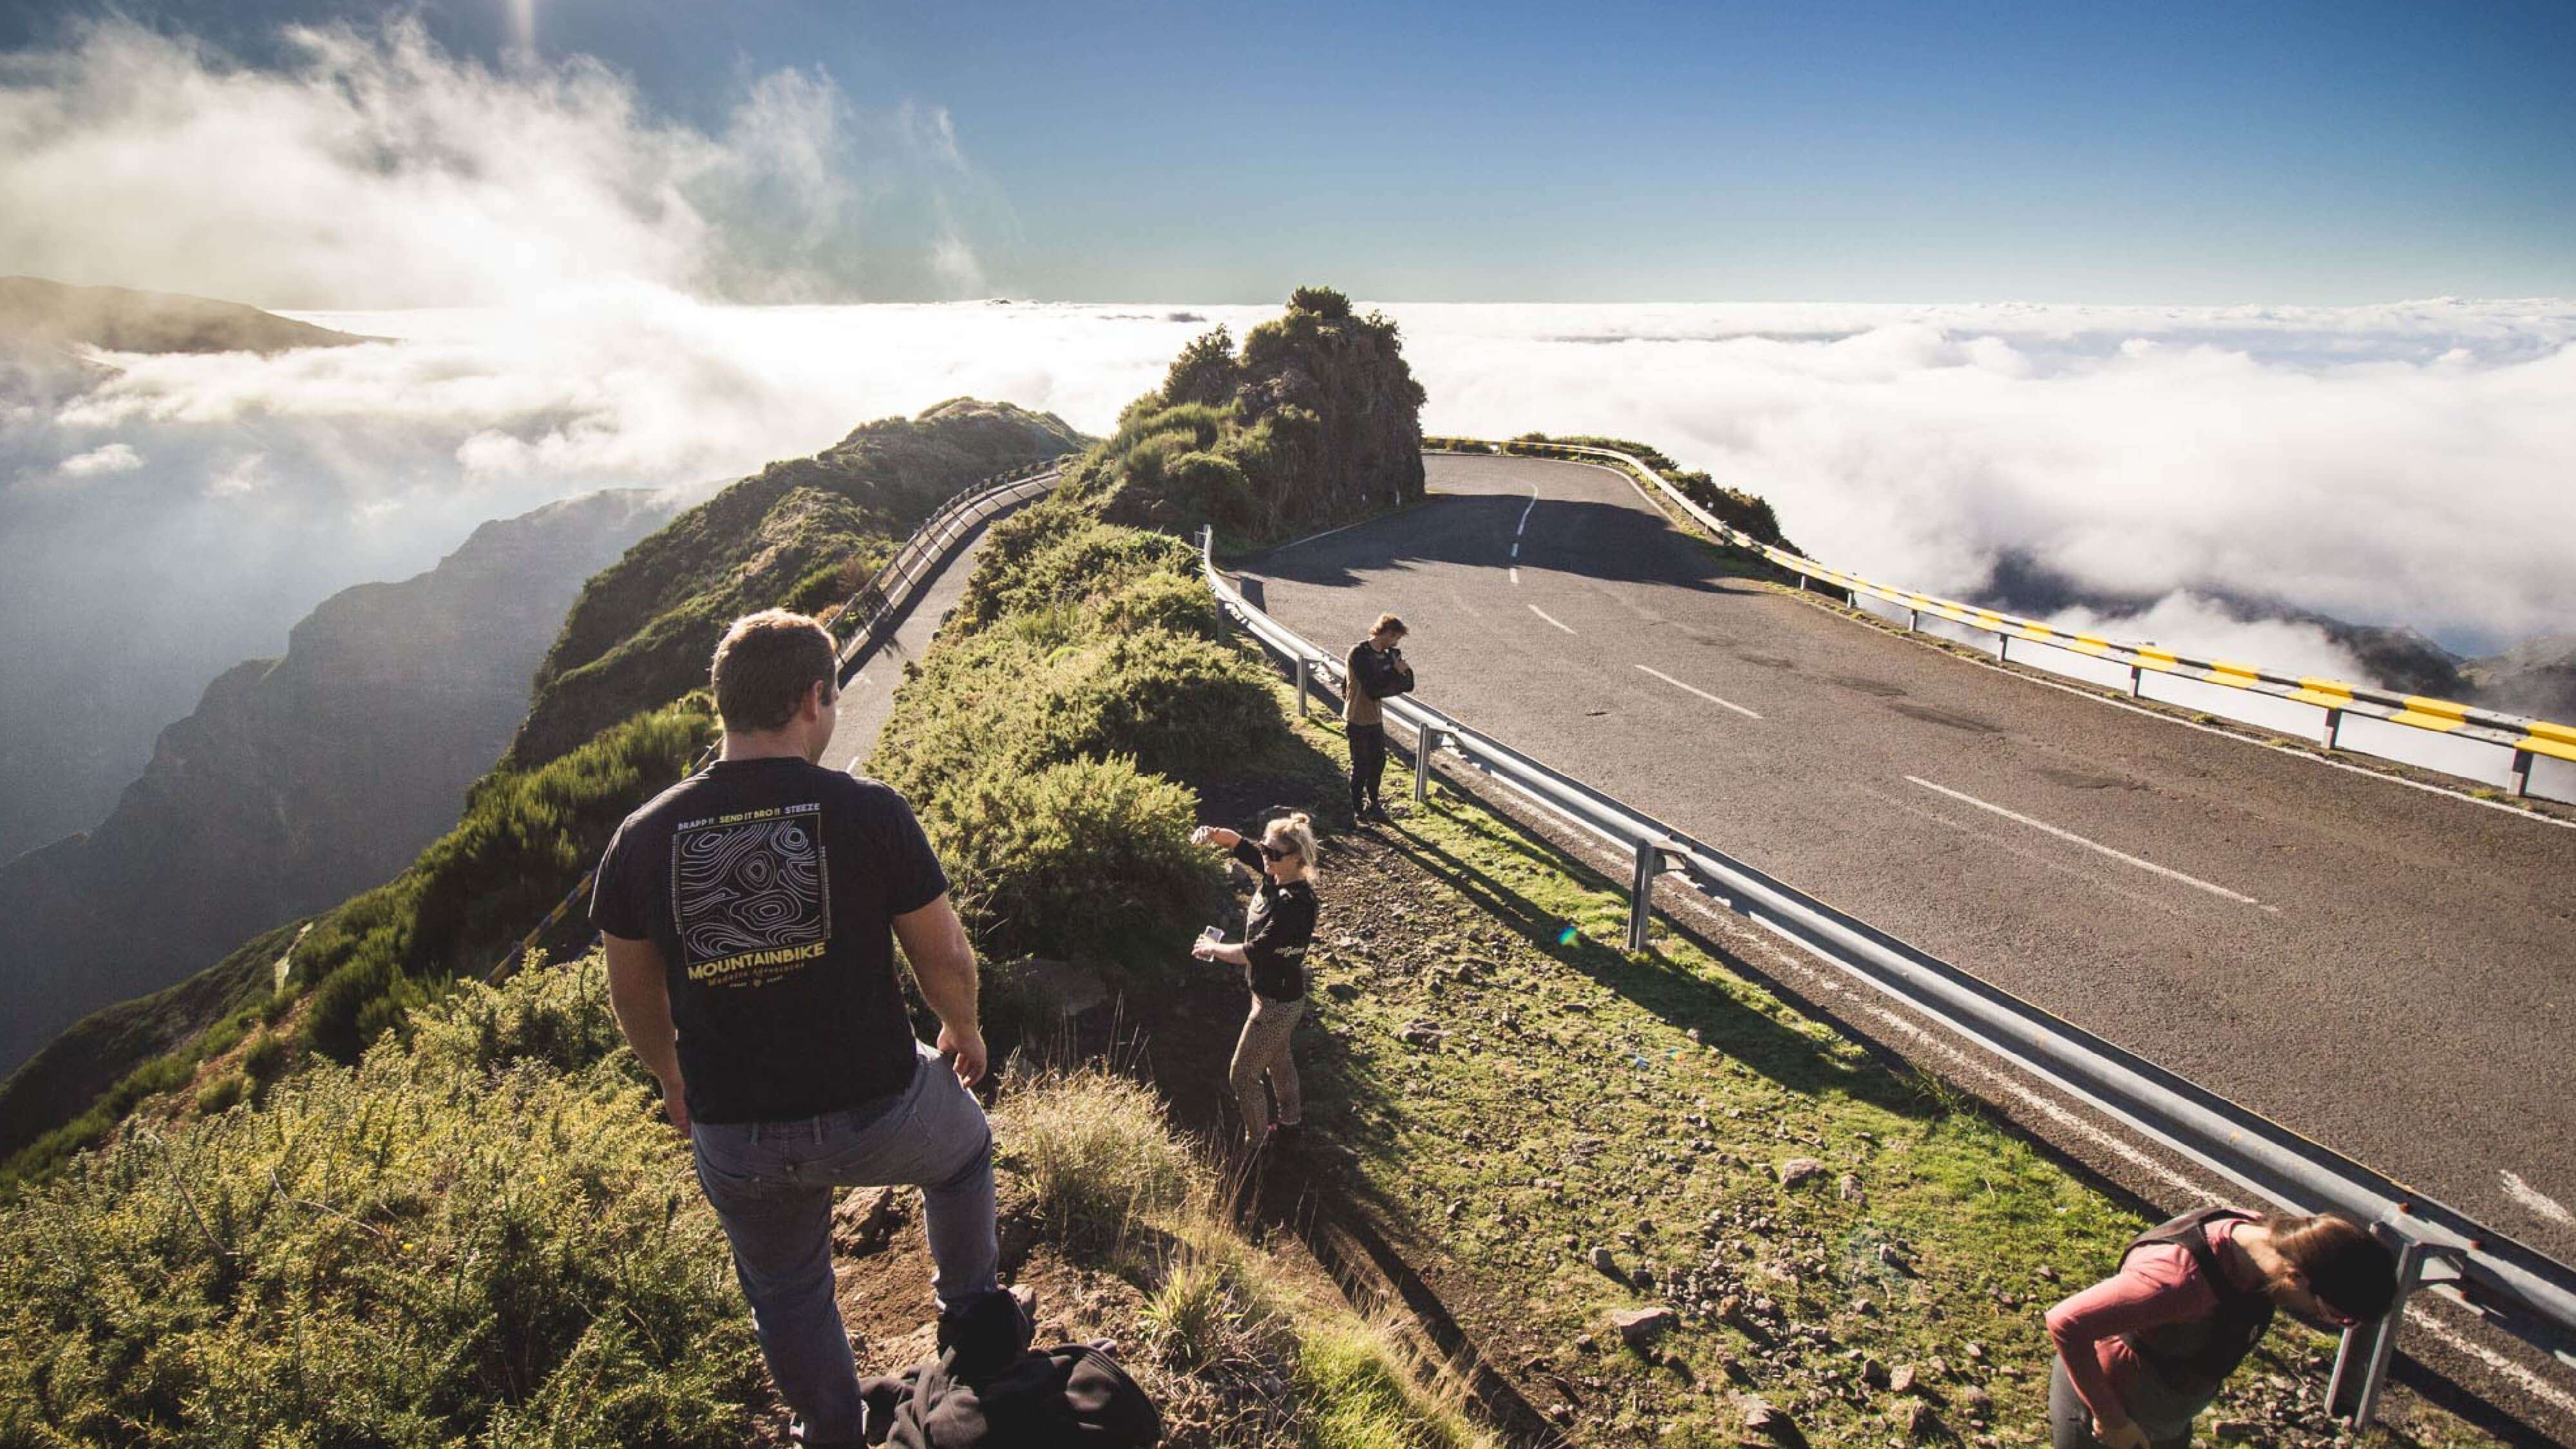 Embracing the rugged beauty of Madeira's peaks on two wheels. Mountain biking through paradise, where adrenaline and breathtaking views collide.